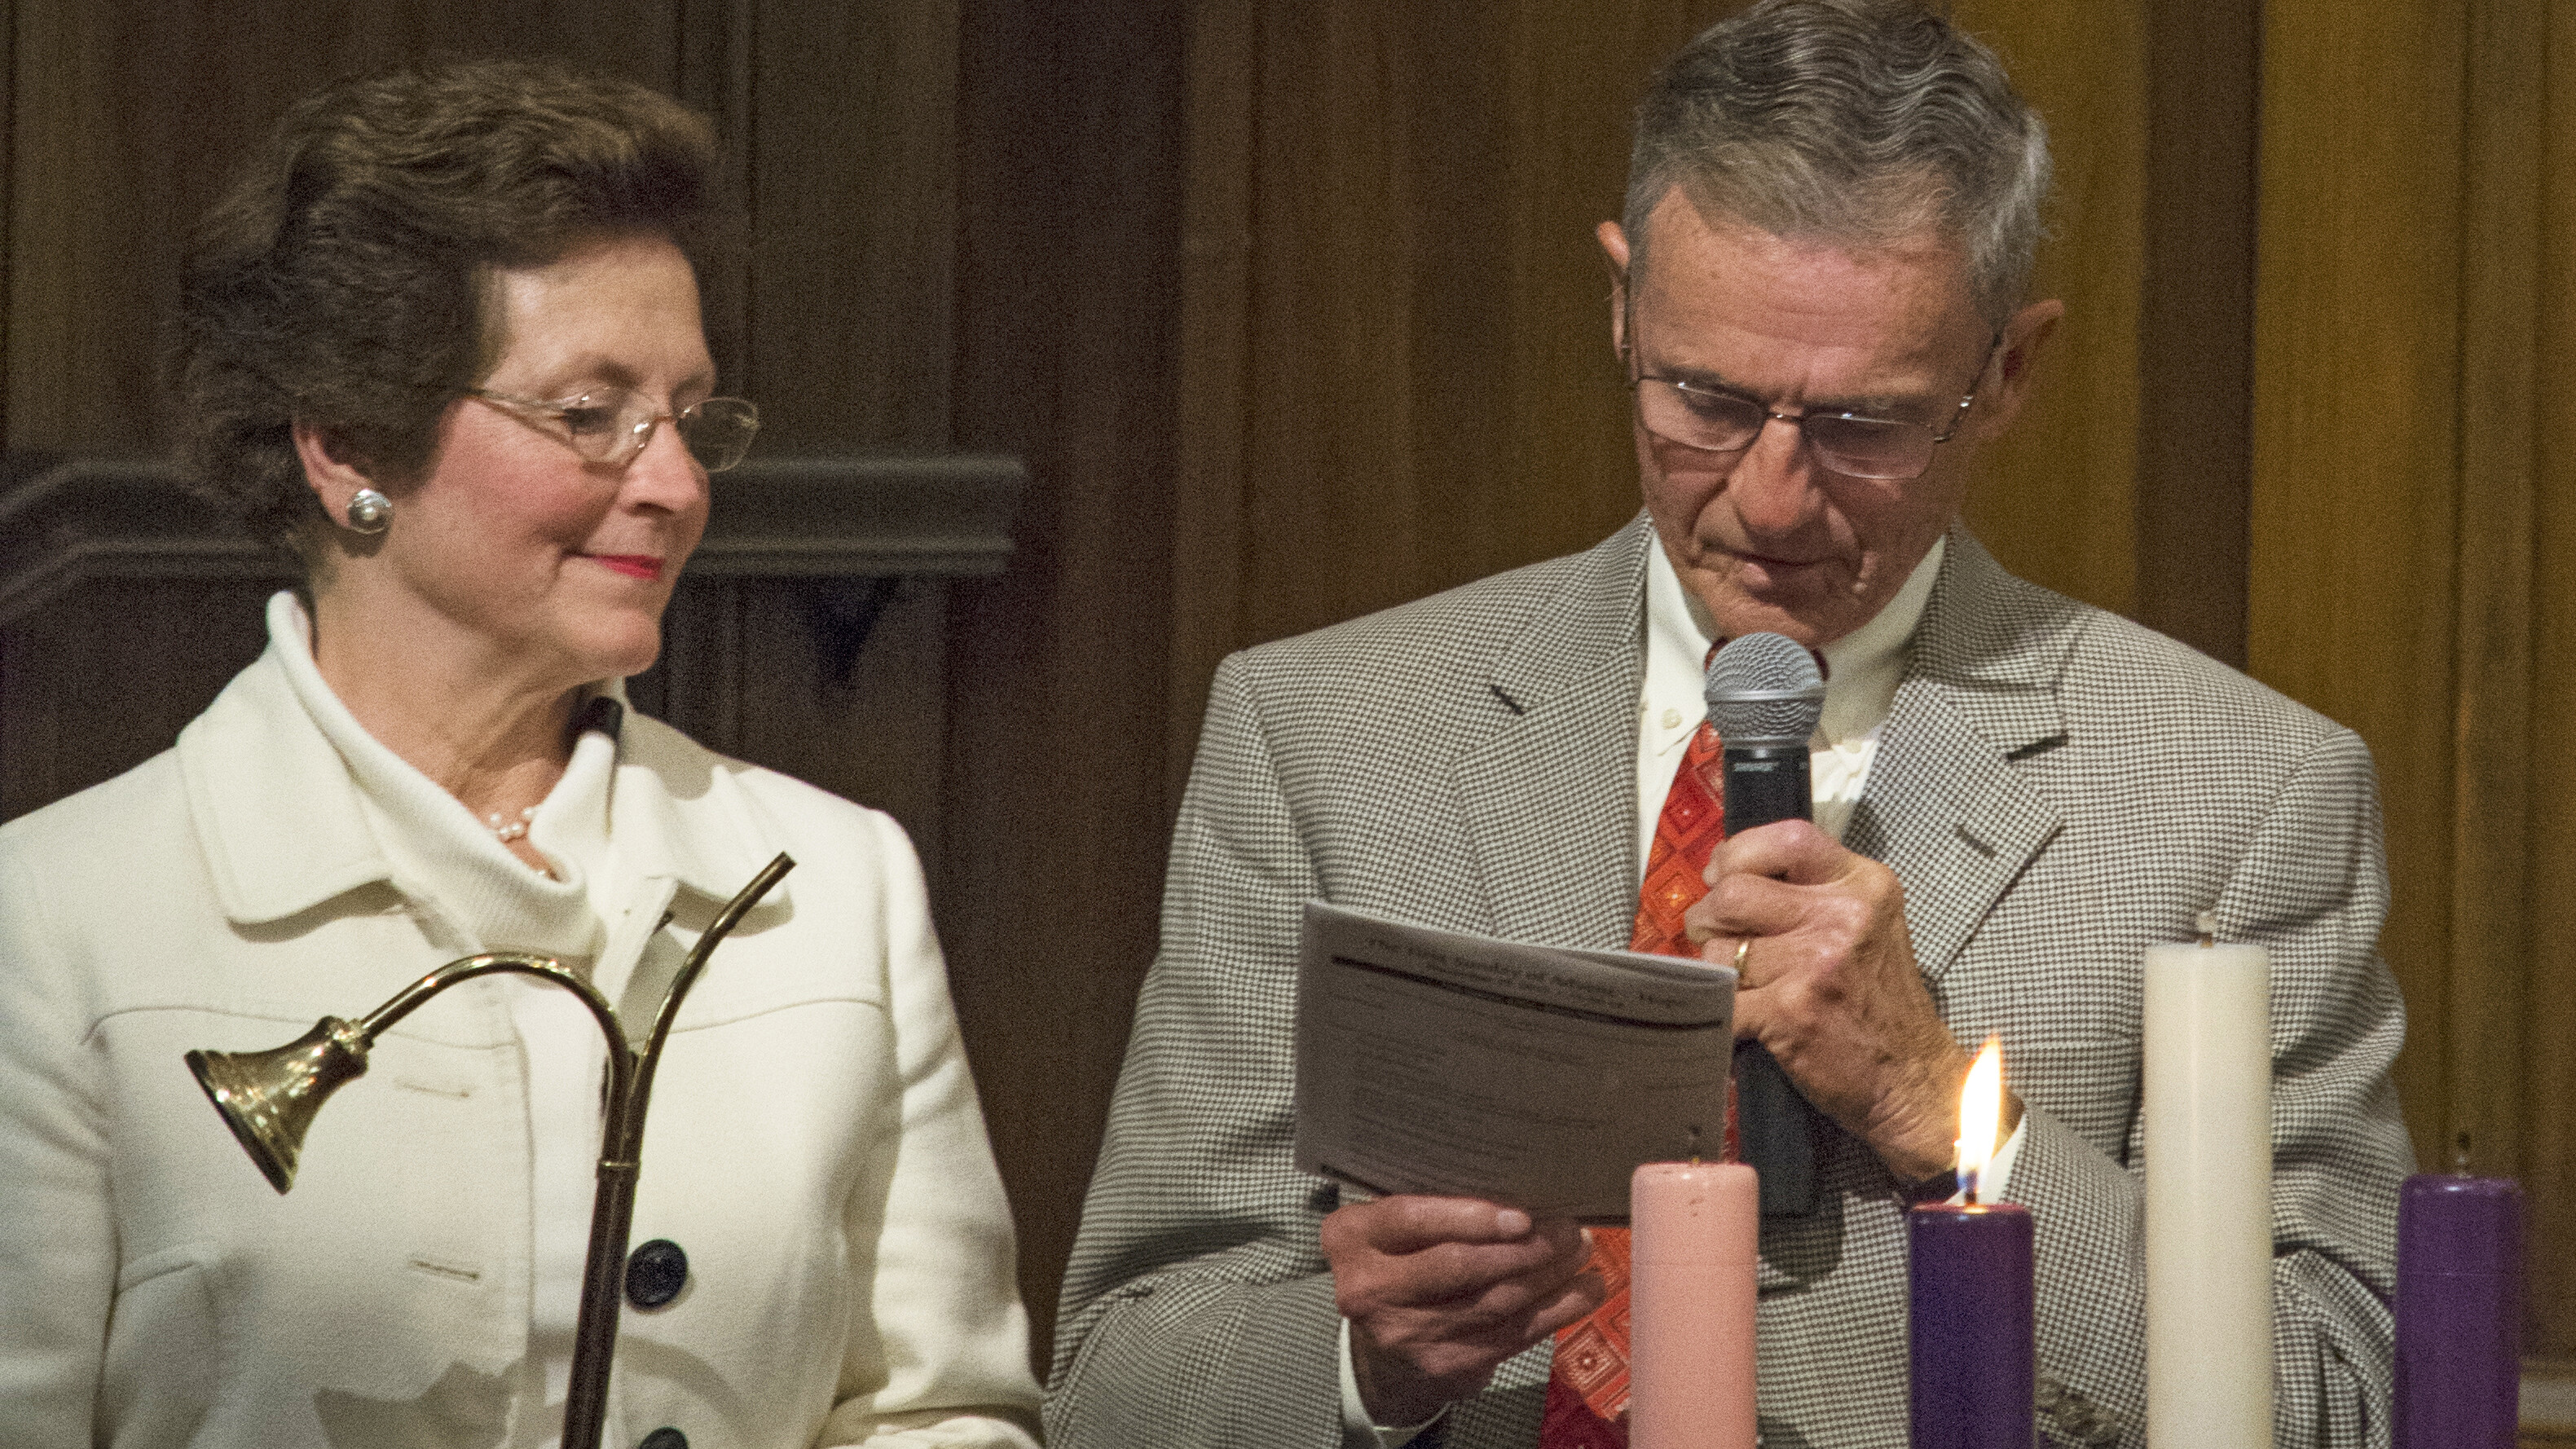 Bob and Sydnor lighting the Advent candle at First Baptist